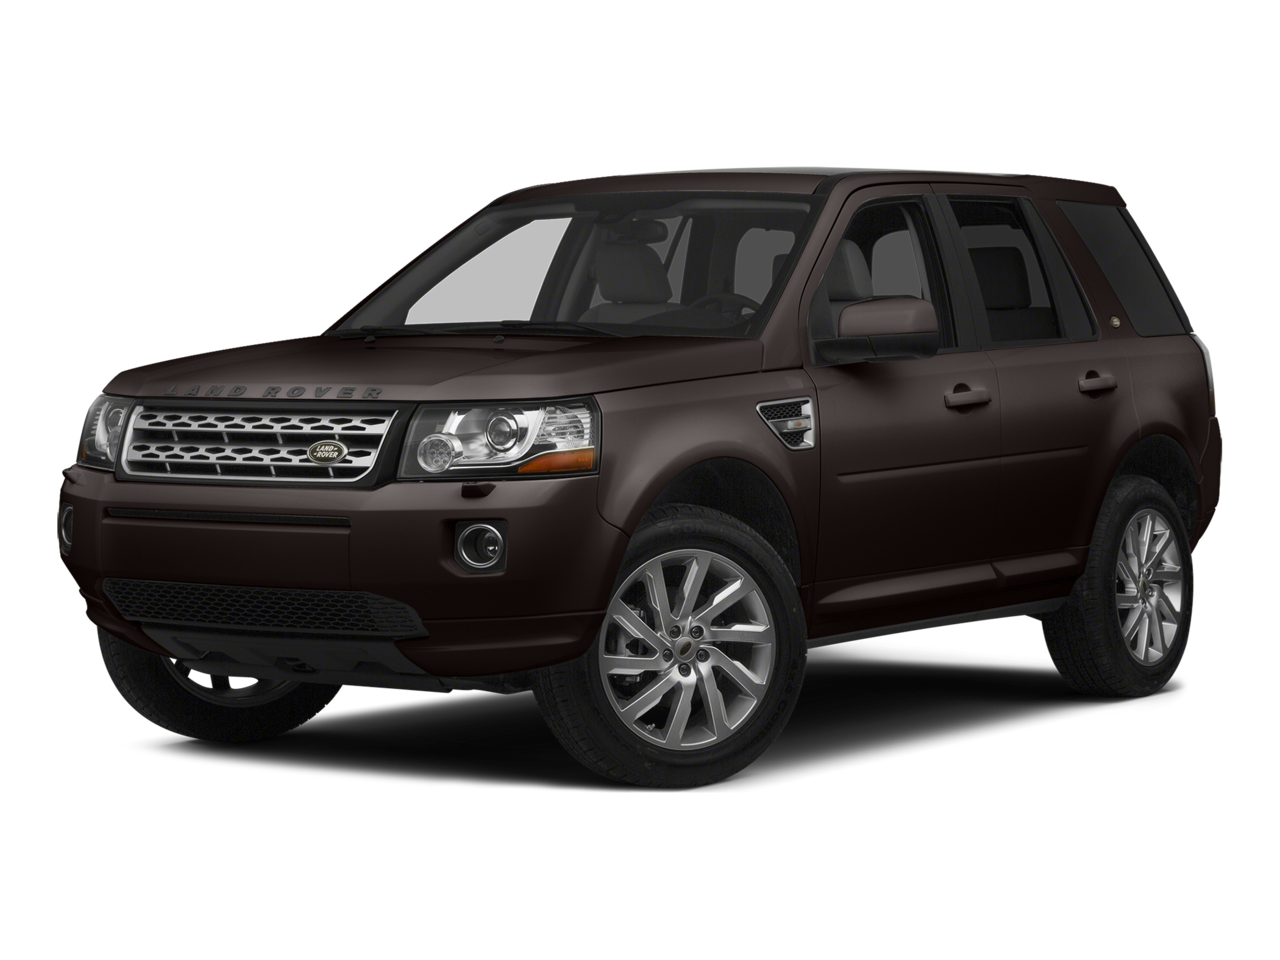 Land Rover LR2 Repair: Service and Maintenance Cost